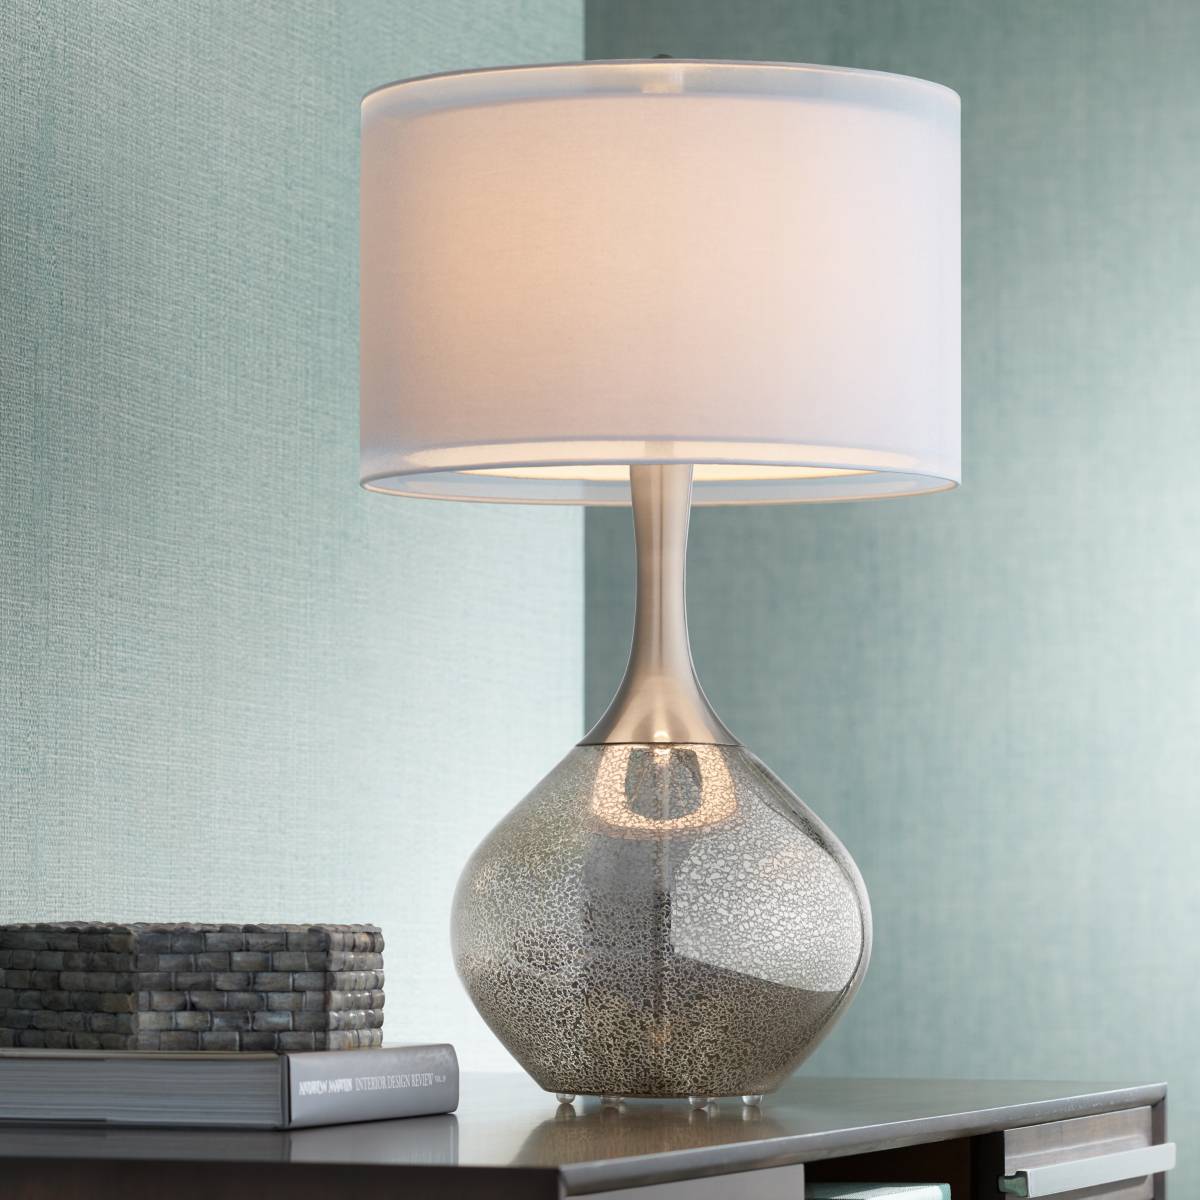 Table Lamps - Designer Styles & Best Selection | Lamps Plus Canada